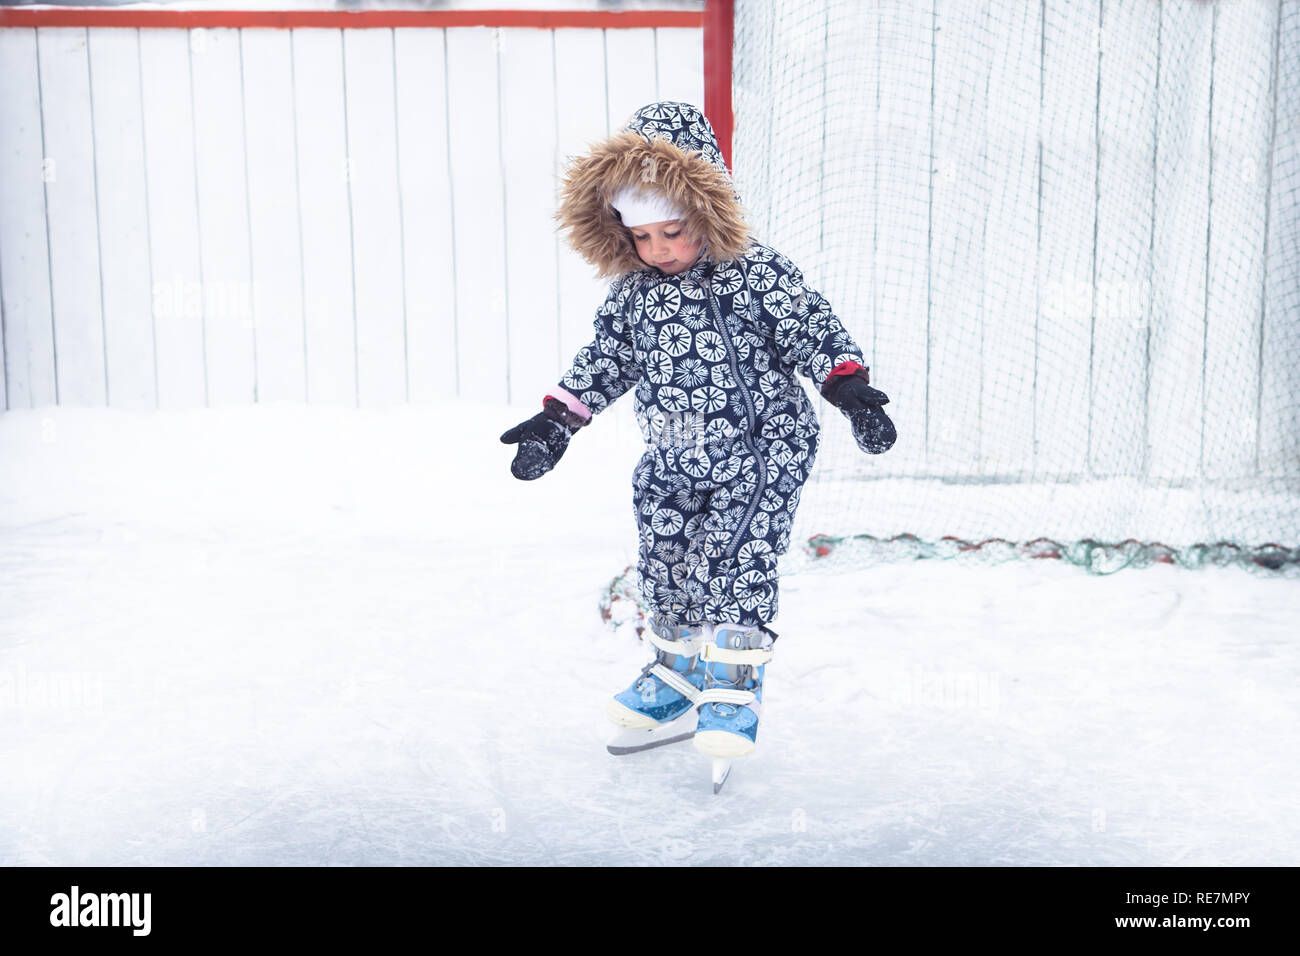 Child kid enjoy learning ice skating on skating rink overcome difficulties in a snowing park during winter holidays Stock Photo